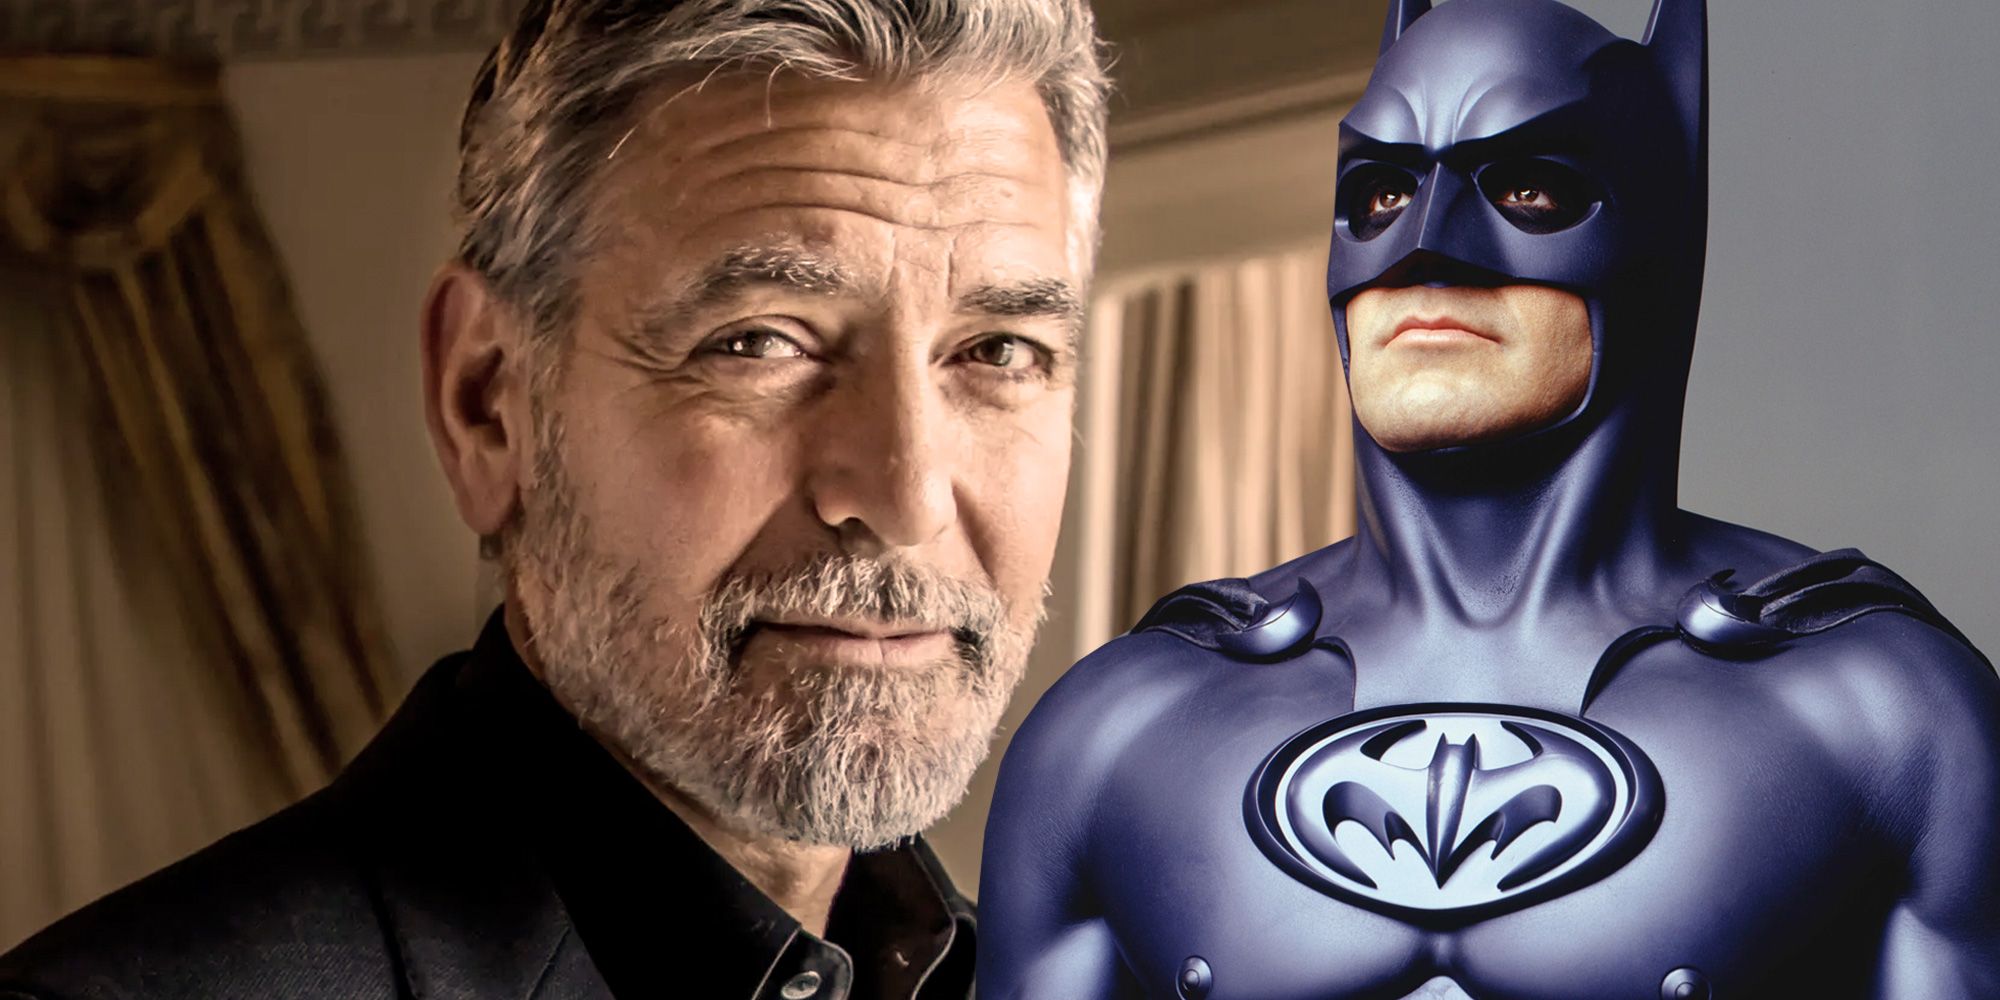 George Clooney in normal clothes and the Batsuit